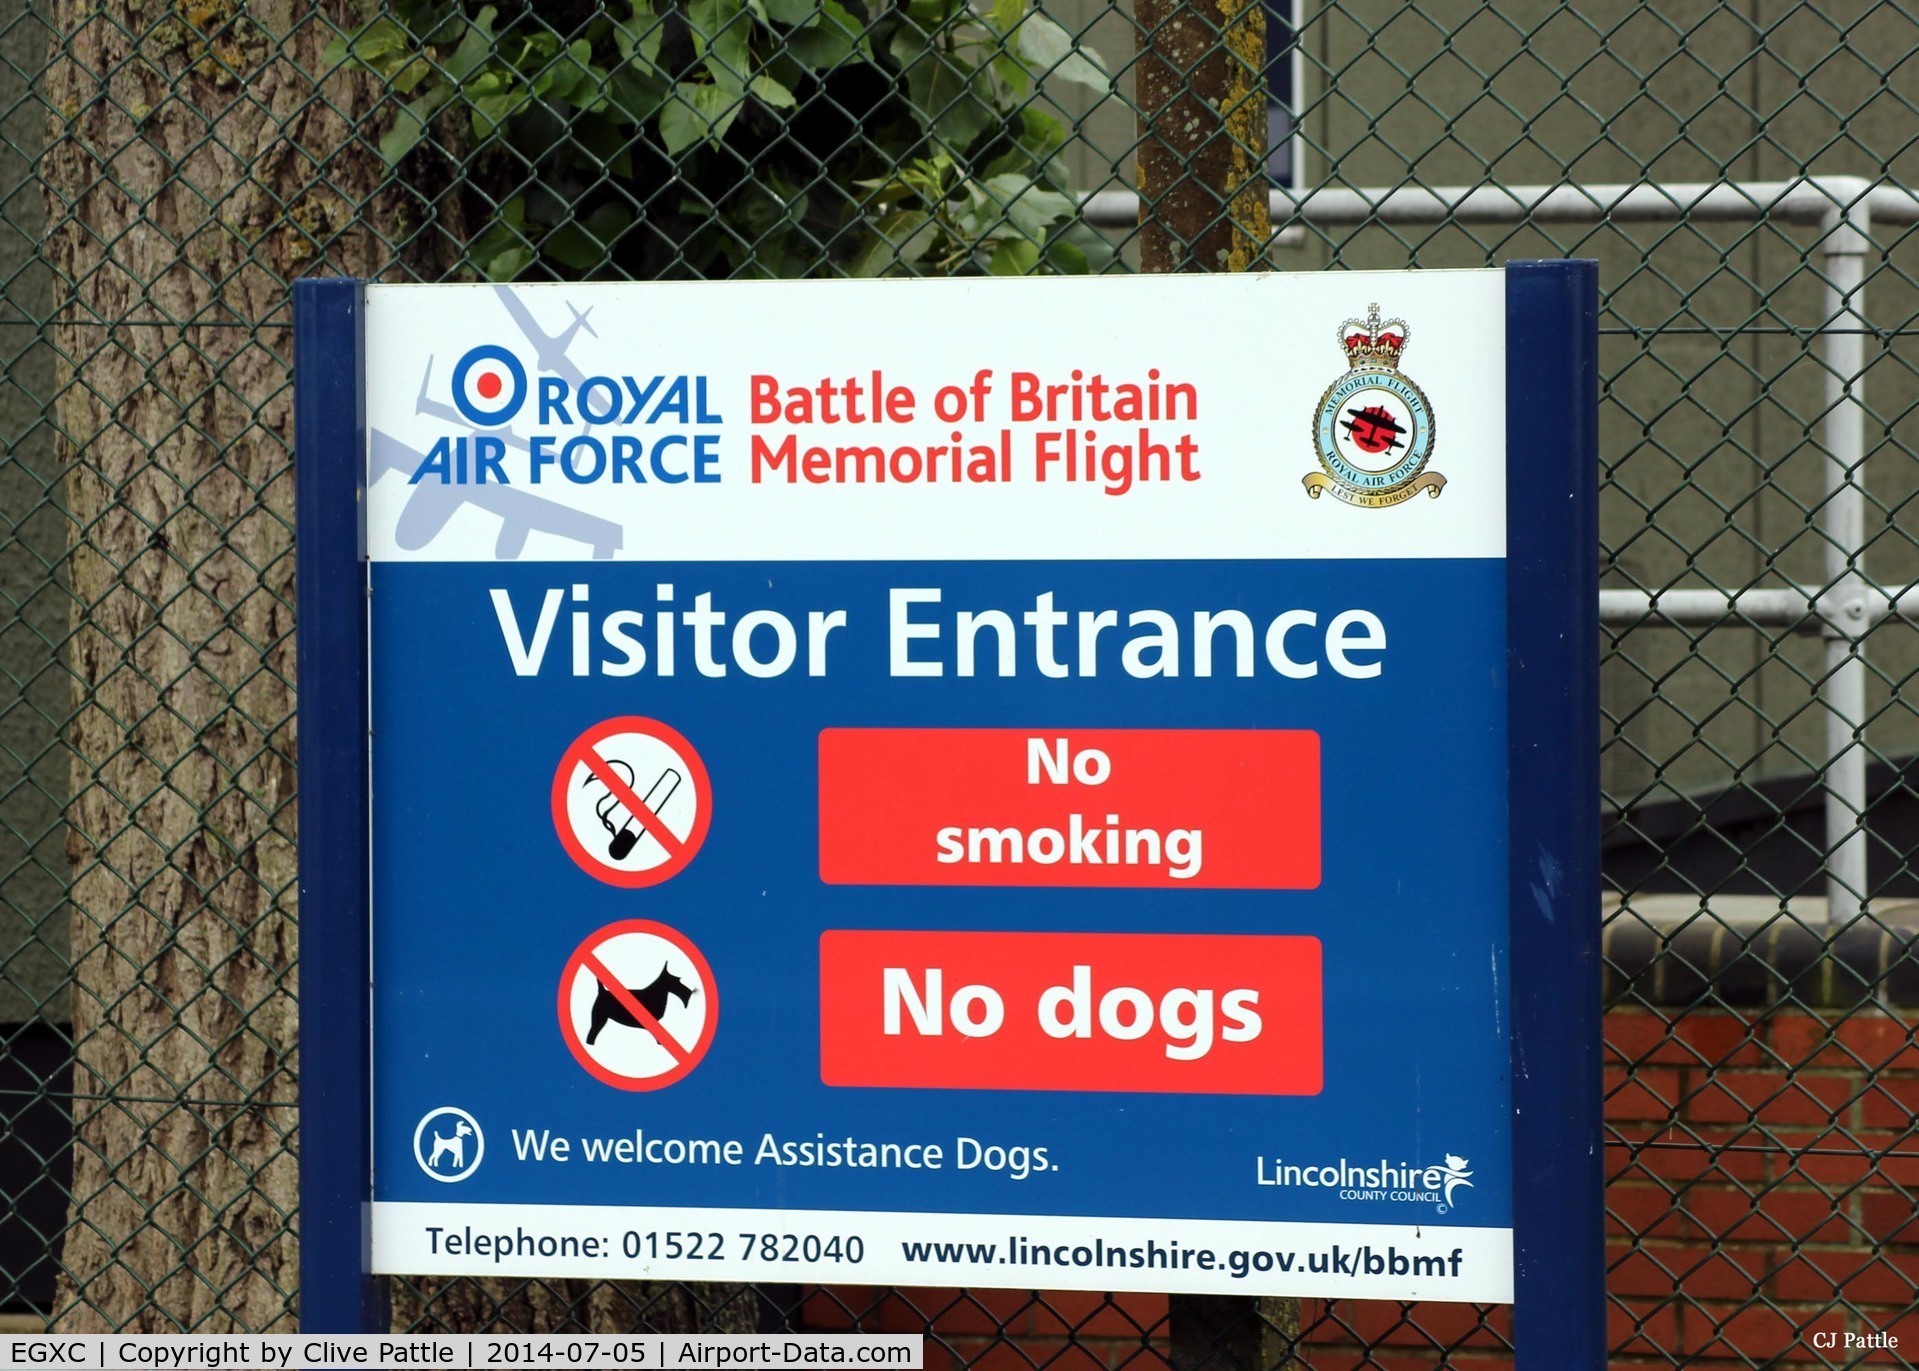 RAF Coningsby Airport, Coningsby, England United Kingdom (EGXC) - A view of the Battle of Britain Memorial Flight (BBMF) sign at RAF Coningsby